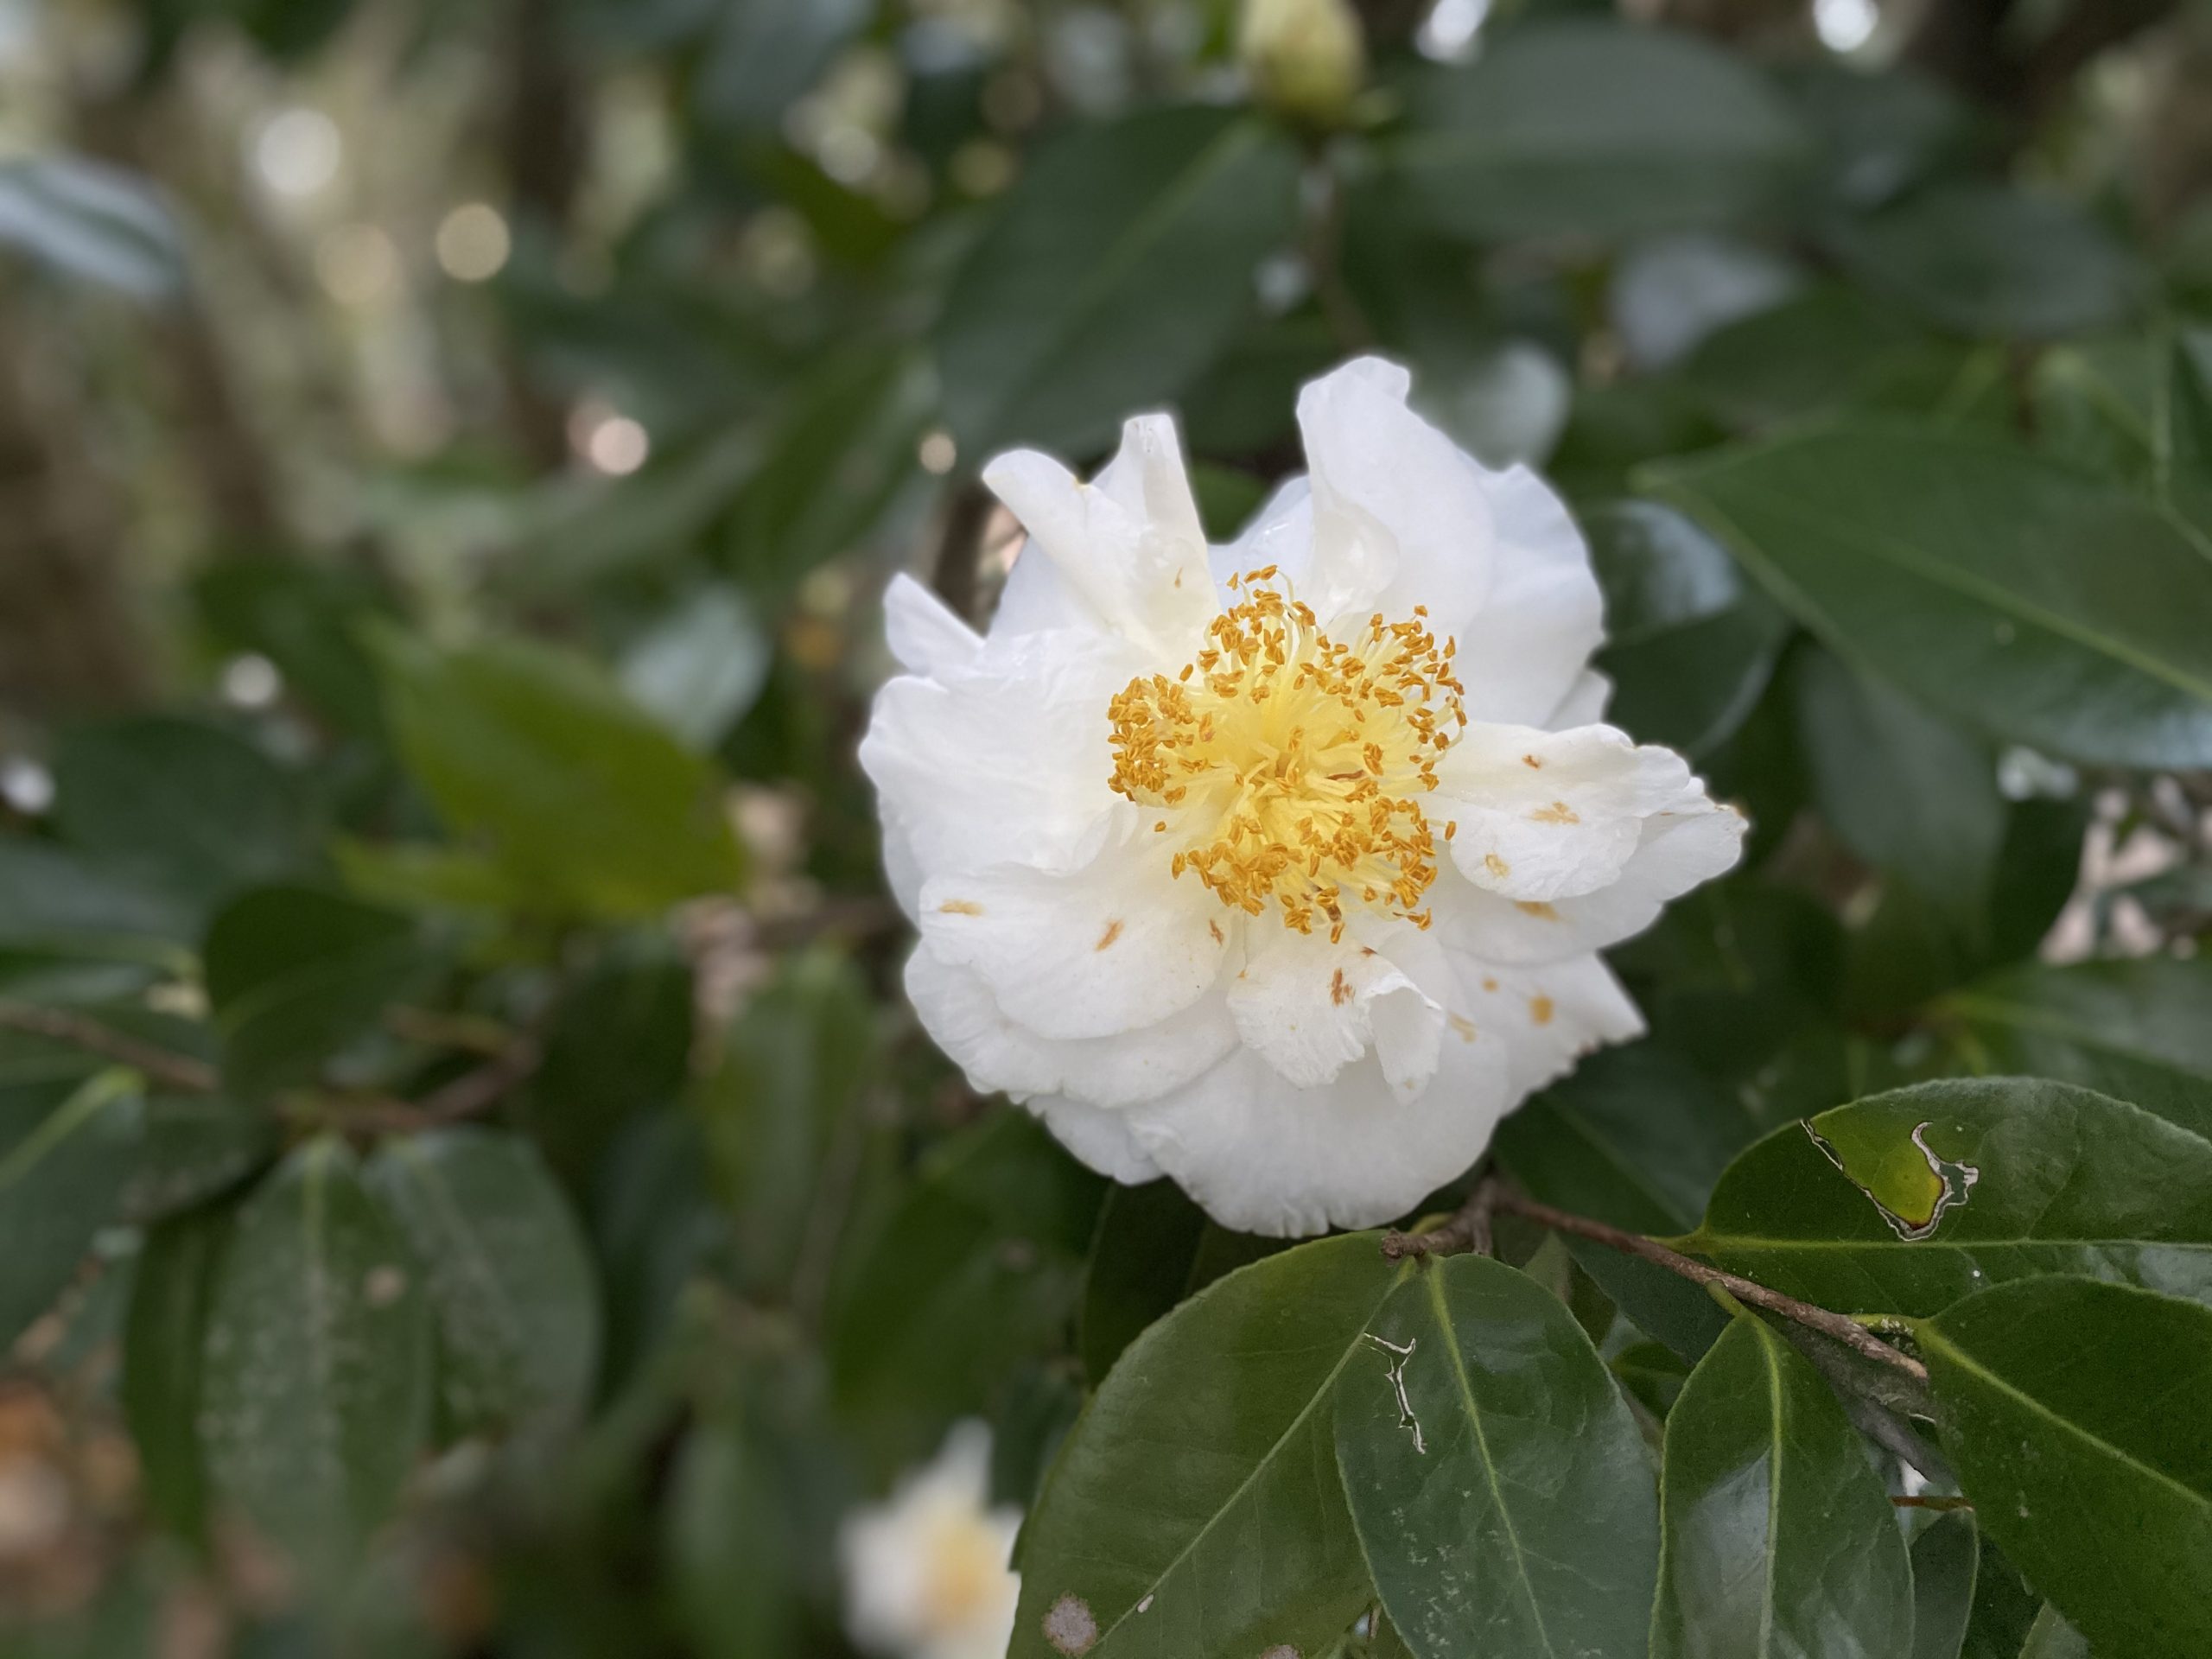 Many sources suggest that you prune camellias after they finish blooming; however, you can prune camellias almost any time except mid- to late-summer. Since camellias are healthier with increased air flow and penetration of sunlight, some experts recommend pruning them to an open center form with both lower and also smaller interior branches and twigs removed. 
